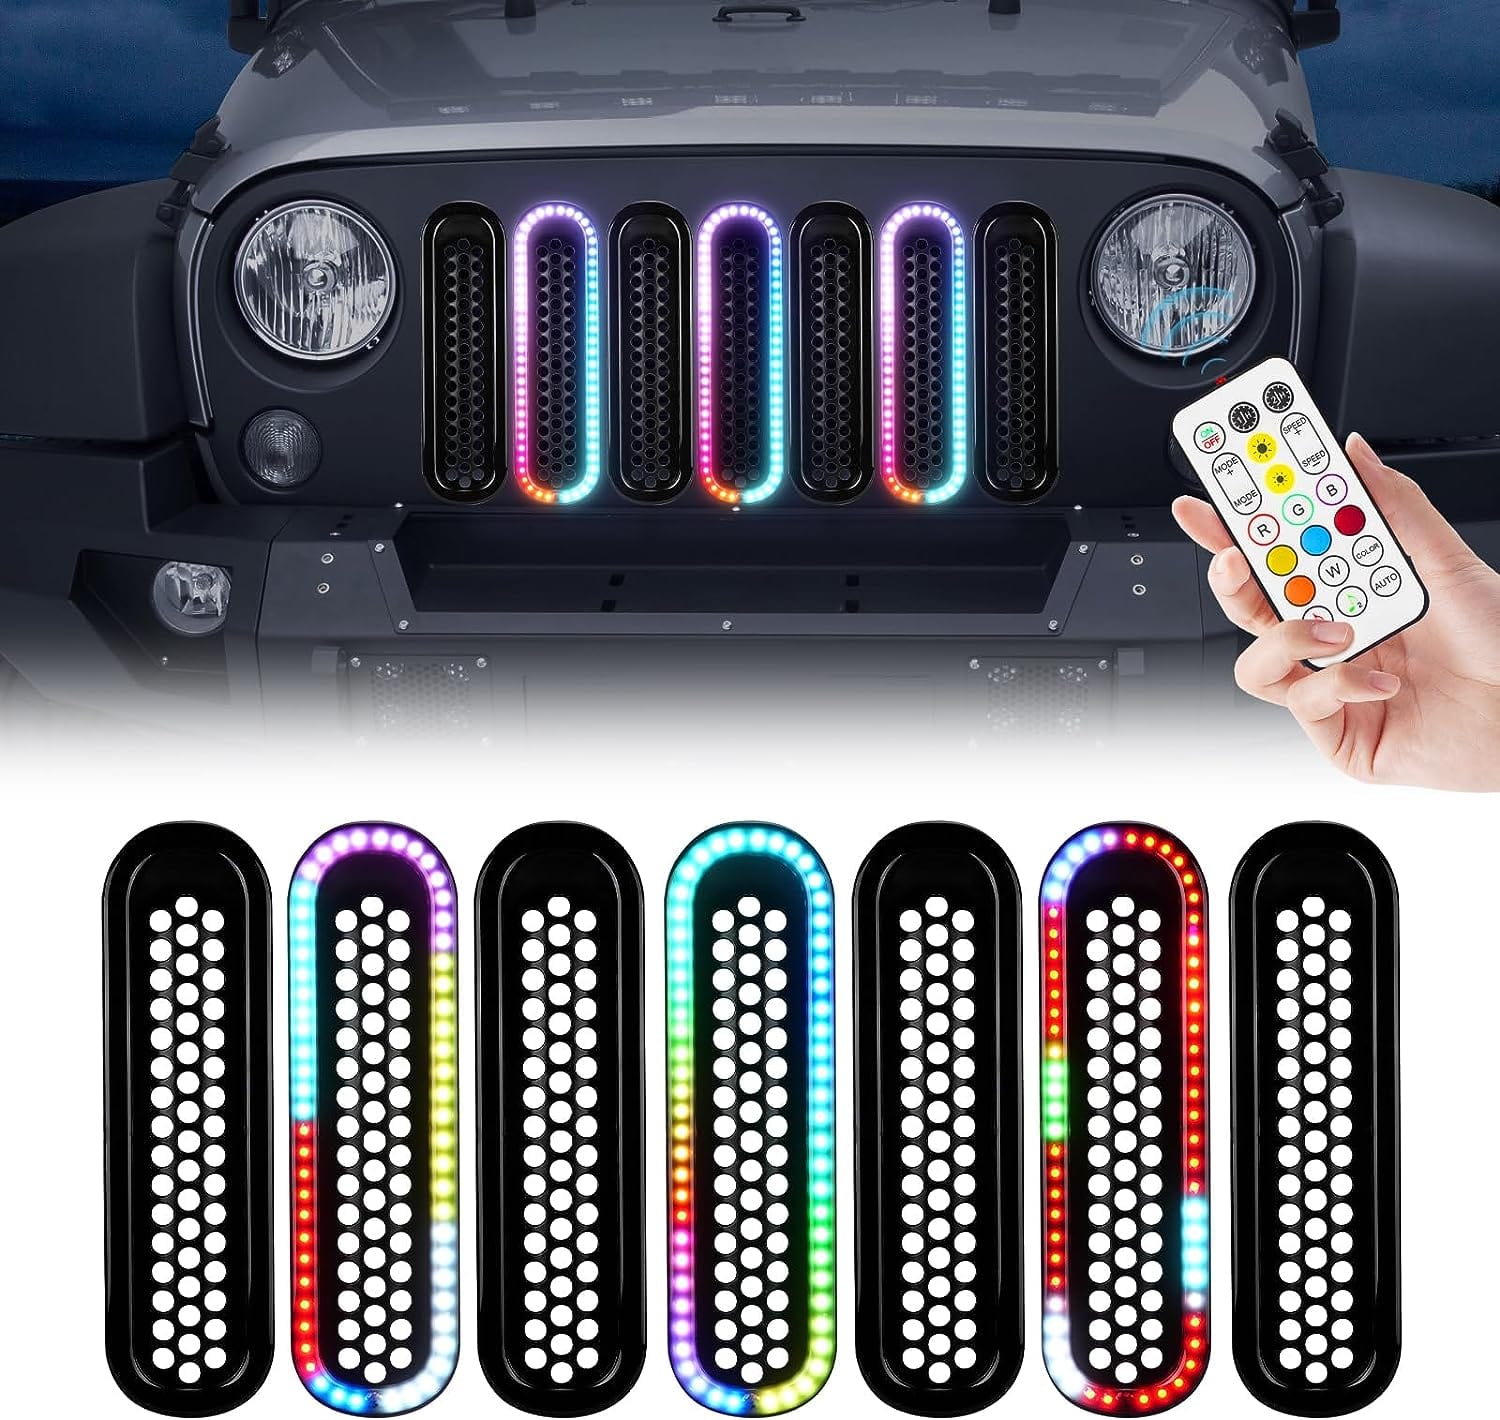 SUPAREE Jeep Grille Light Suparee Jeep Wrangler Grille Inserts with RGB White DRL Lights for 2007-2015 JK JKU Product description